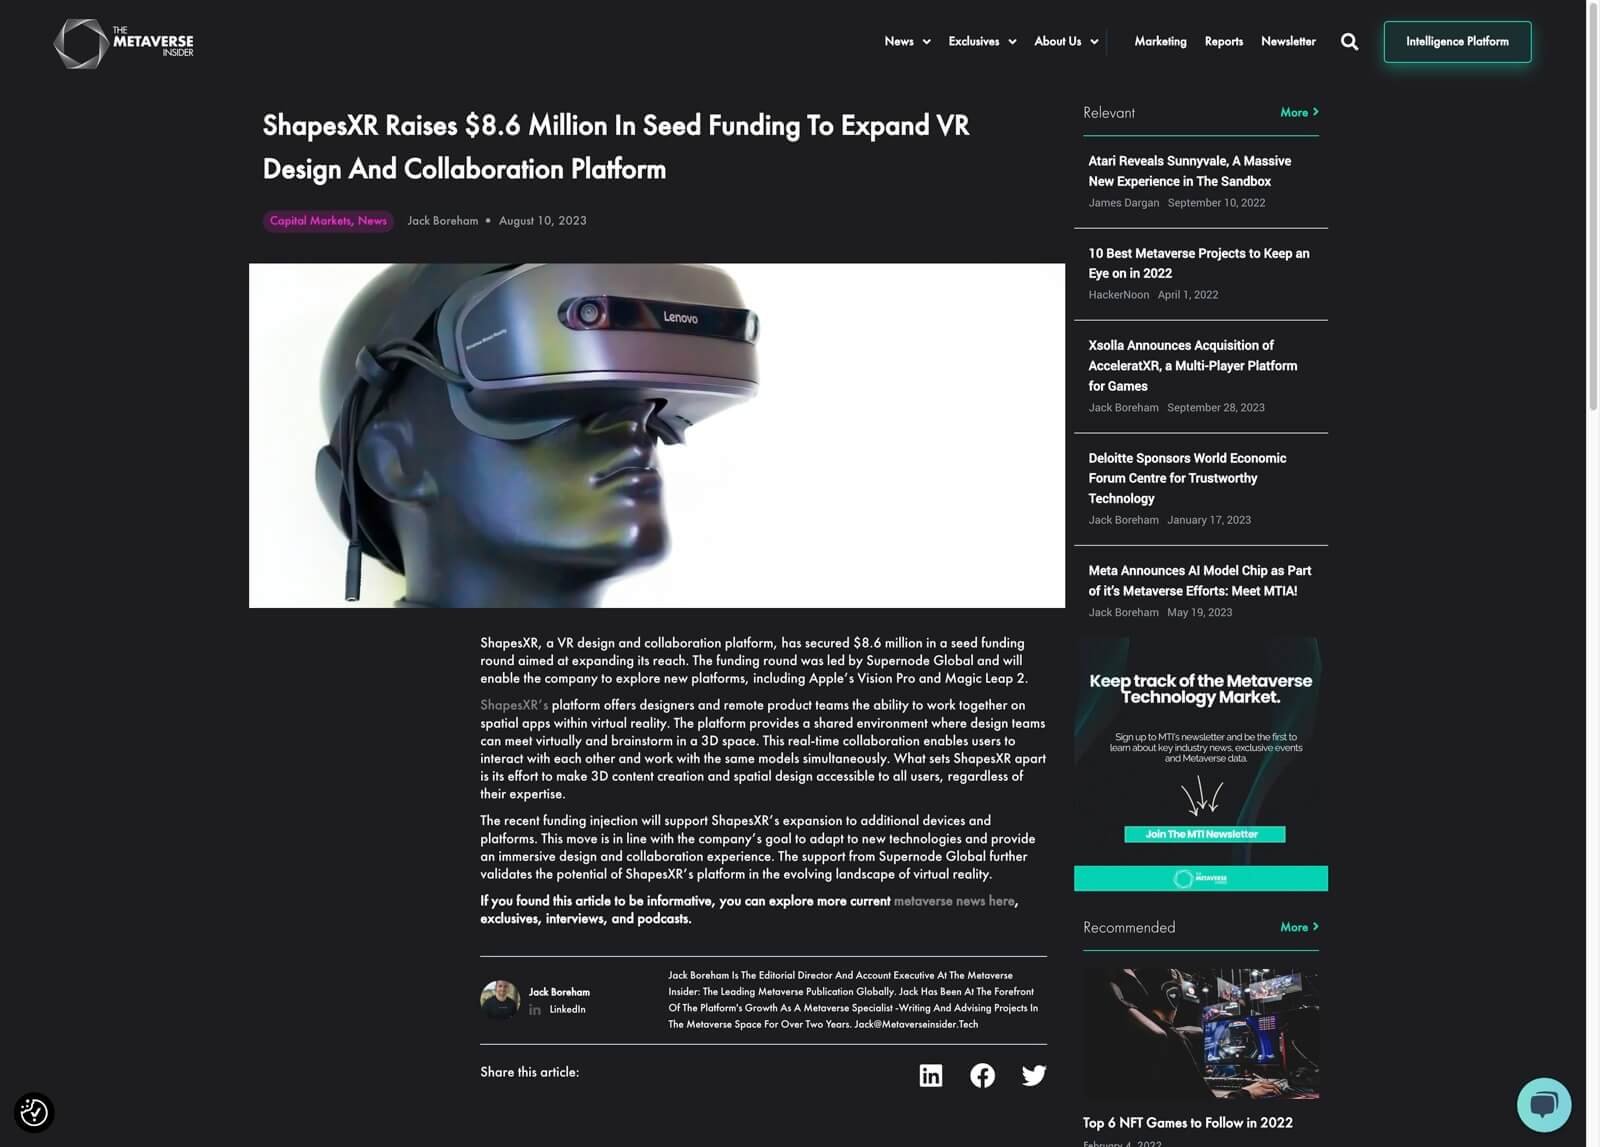 Metaverse-Insider-ShapesXR-Raises-8-6-Million-in-Seed-Funding-to-Expand-VR-Design-and-Collaboration-Platform.jpg